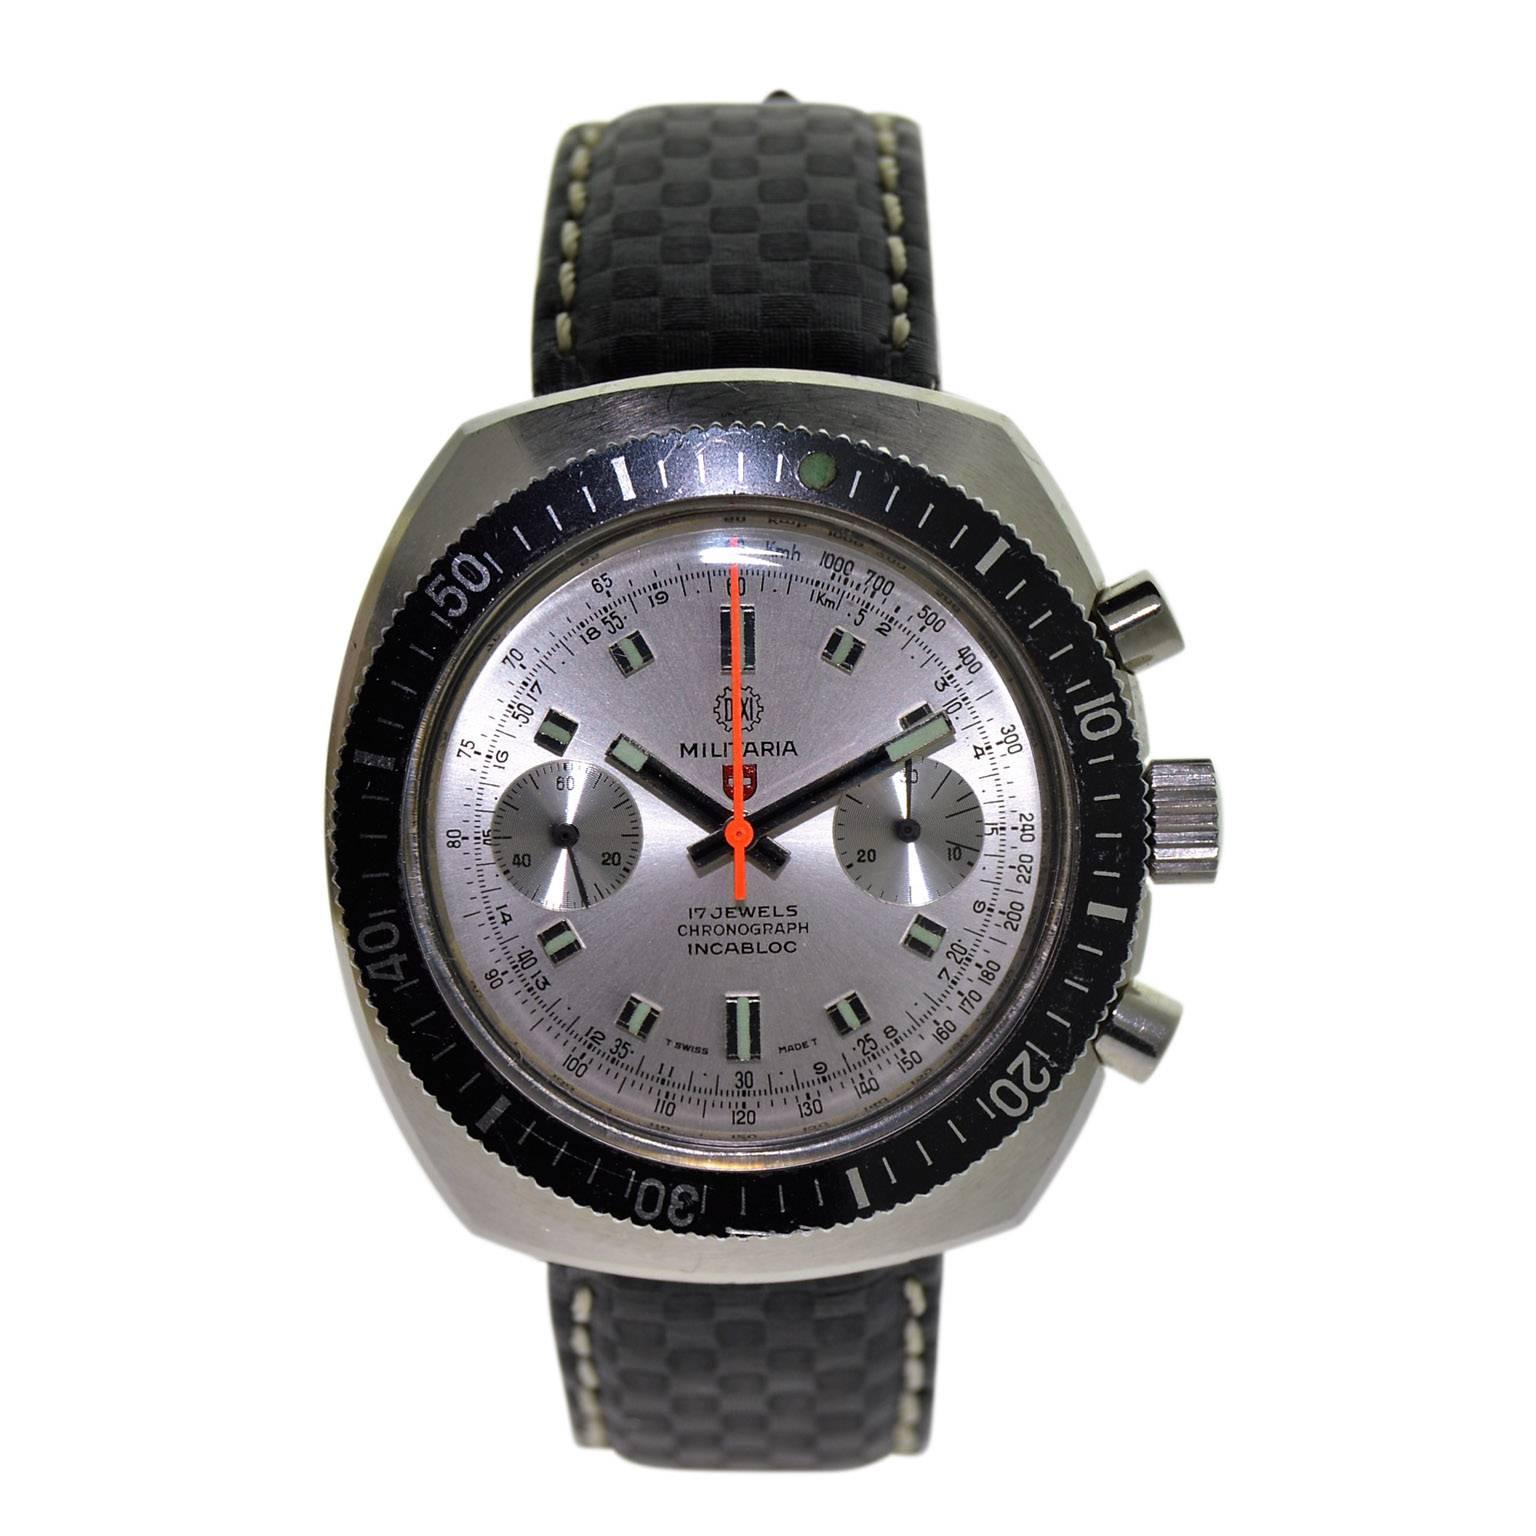 Militaria Stainless Steel Stock Sport Chronograph Manual Wrist Watch, 1970s